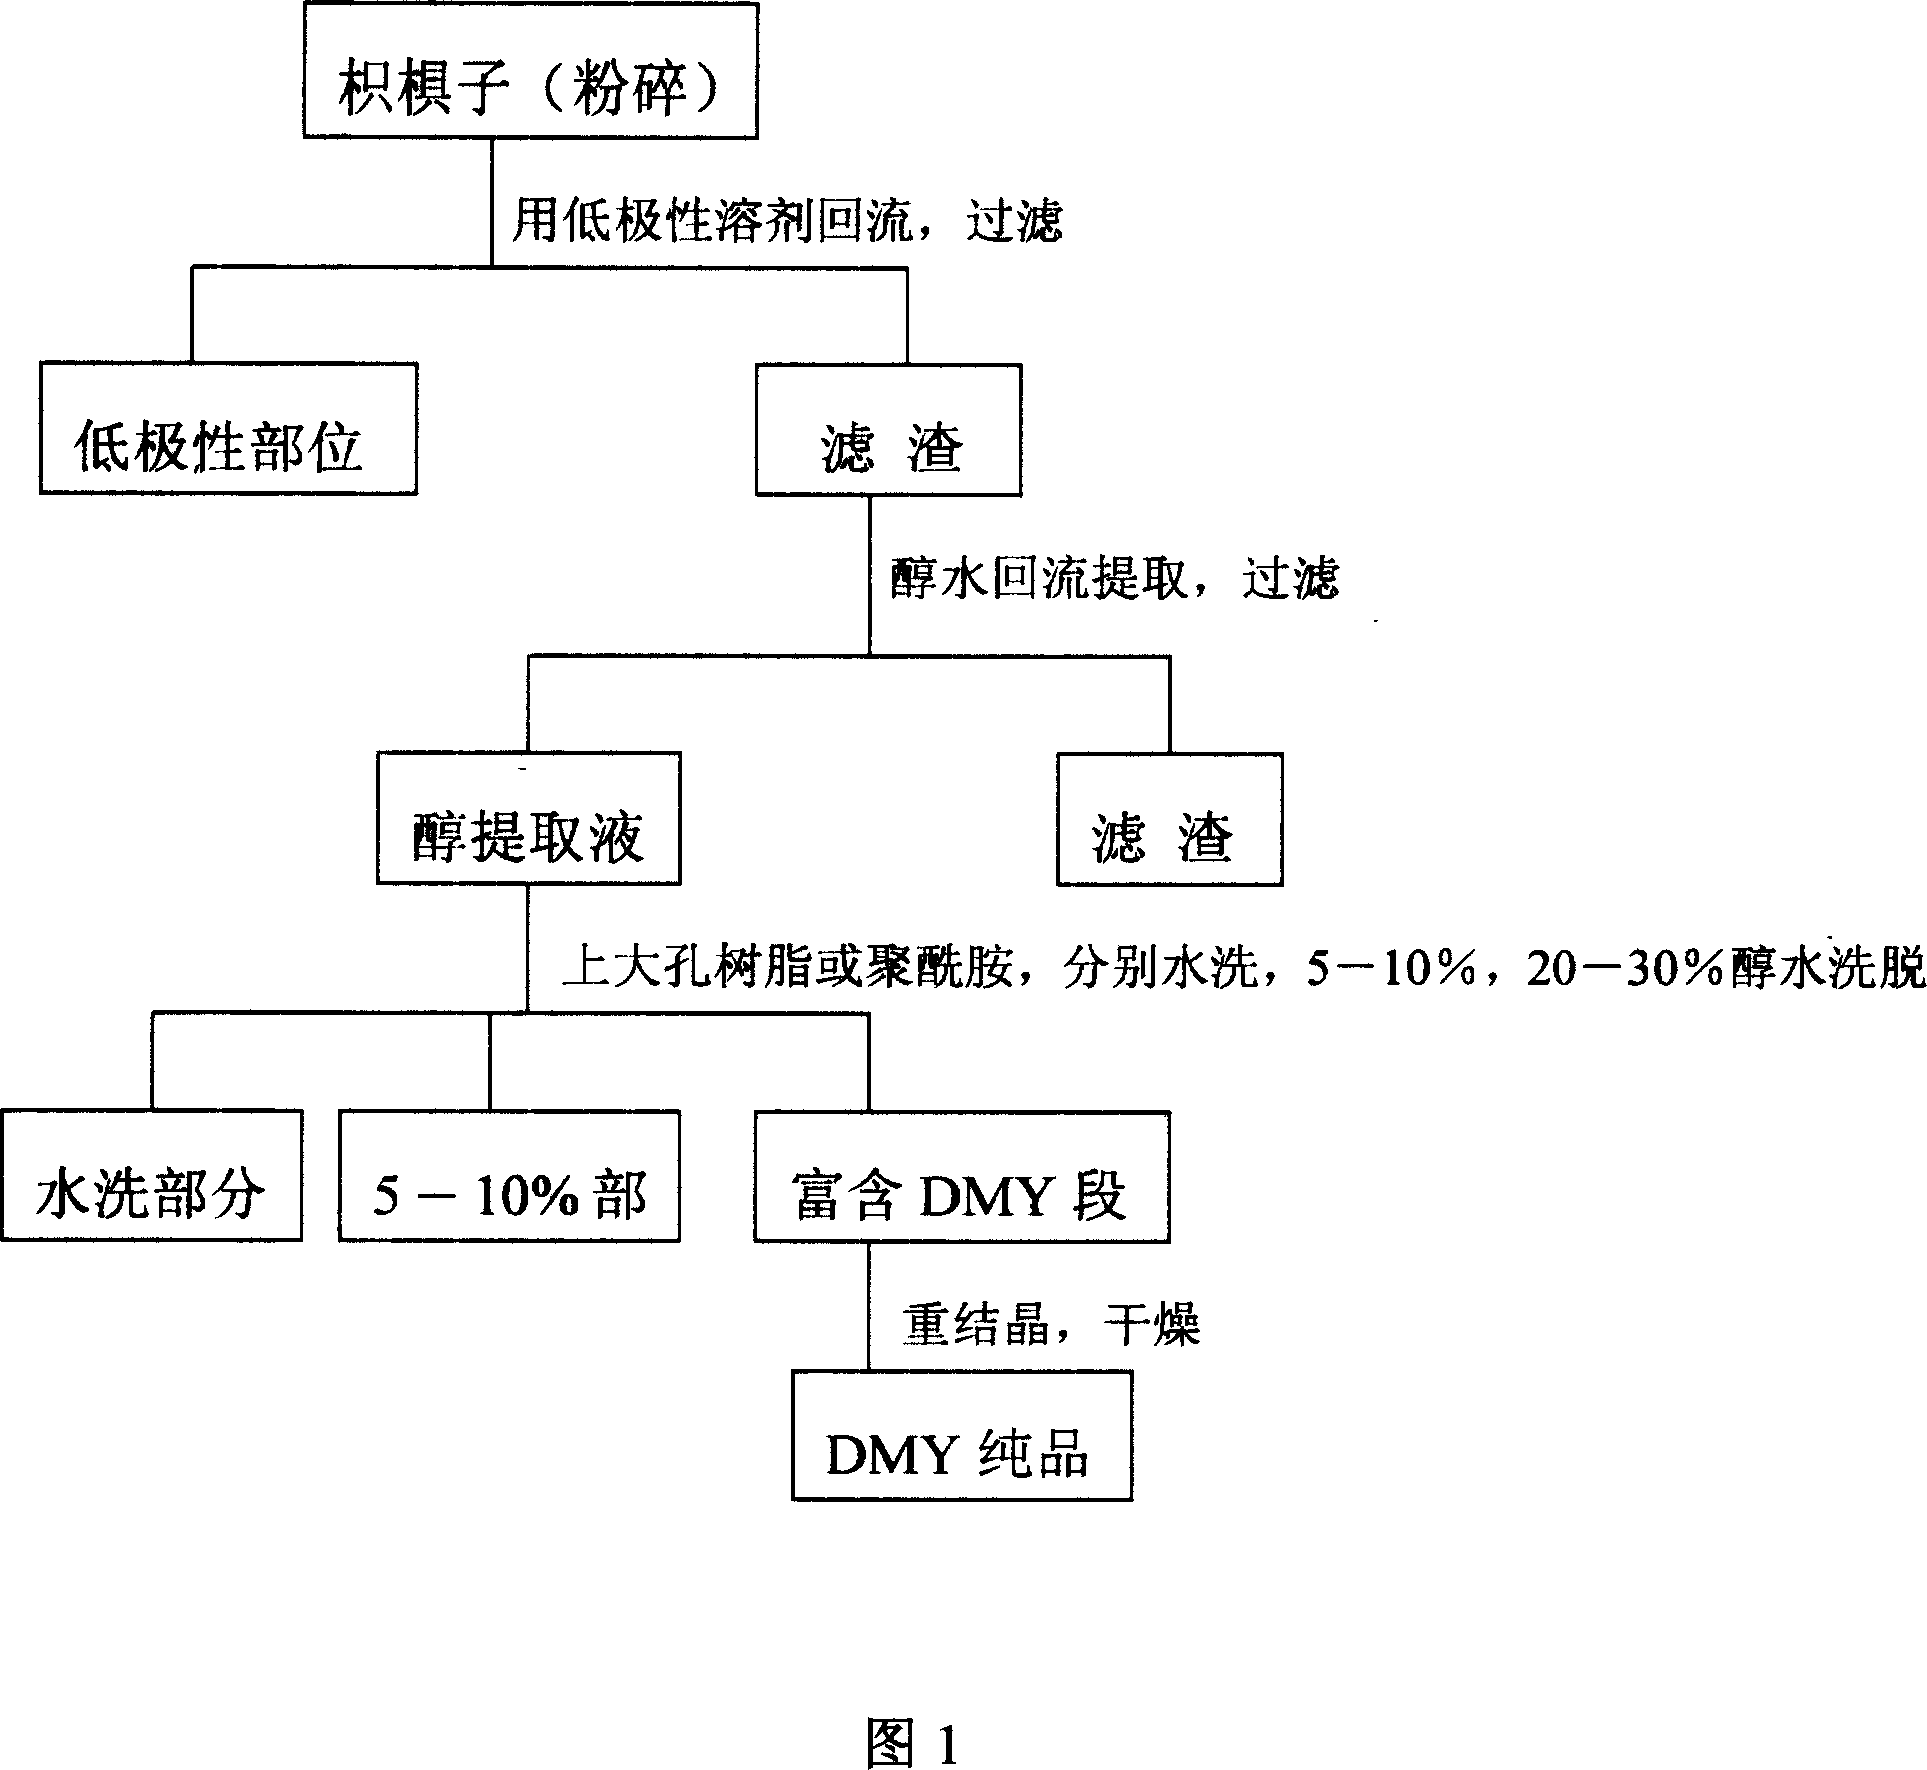 Method for extracting dihydromyricetin from Japanese raisin tree seed